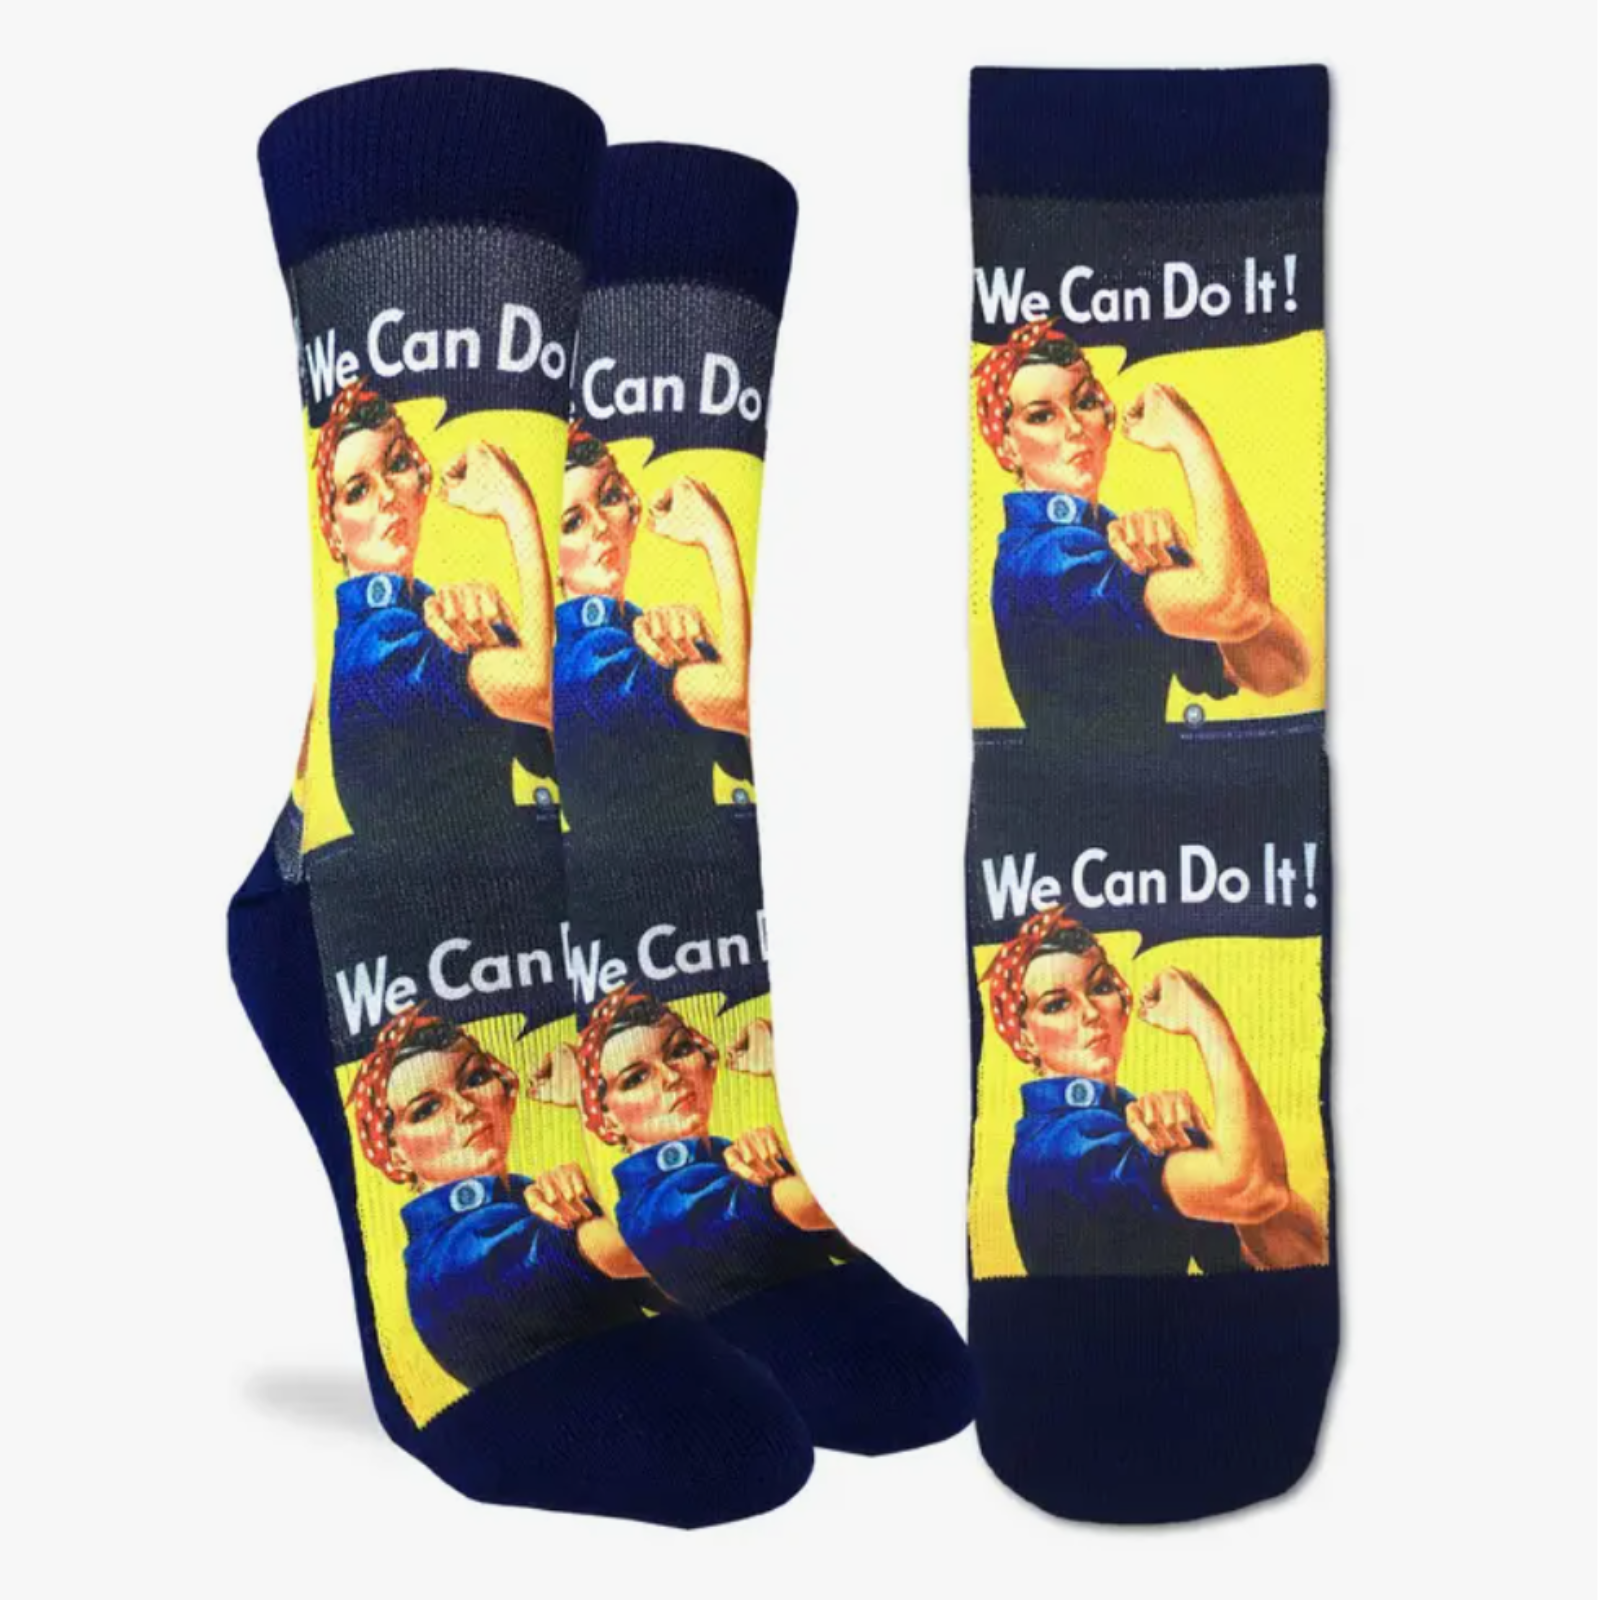 Good Luck Sock women's navy blue crew sock showing Rosie the Riveter and We Can Do It on display feet